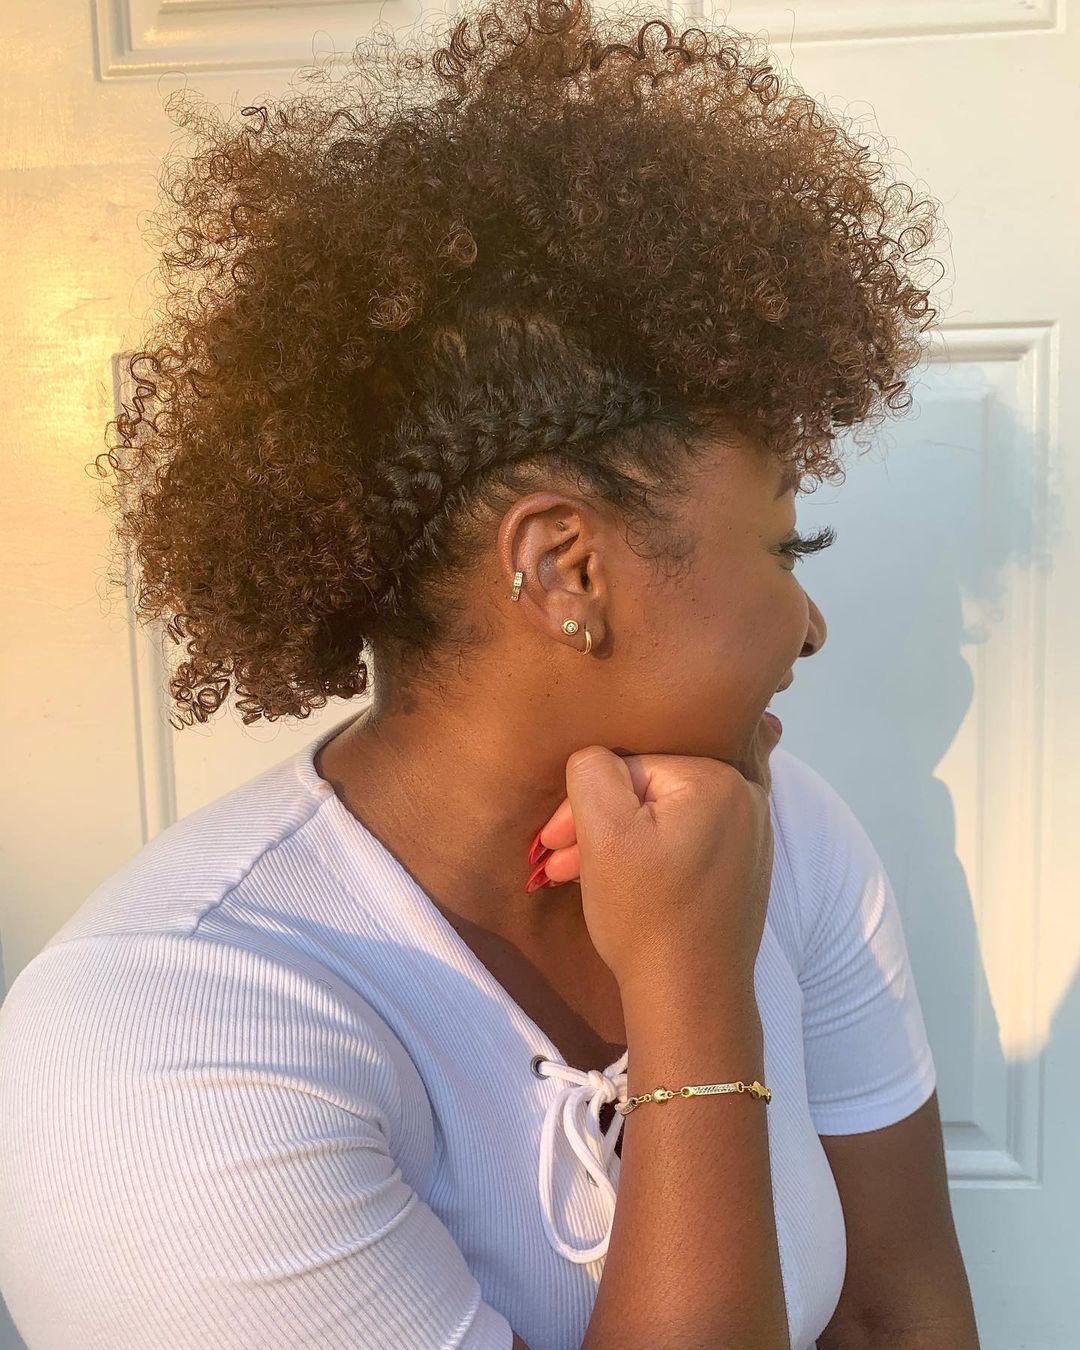 Frohawk frizzy curly hair from bahamiancurlgurl